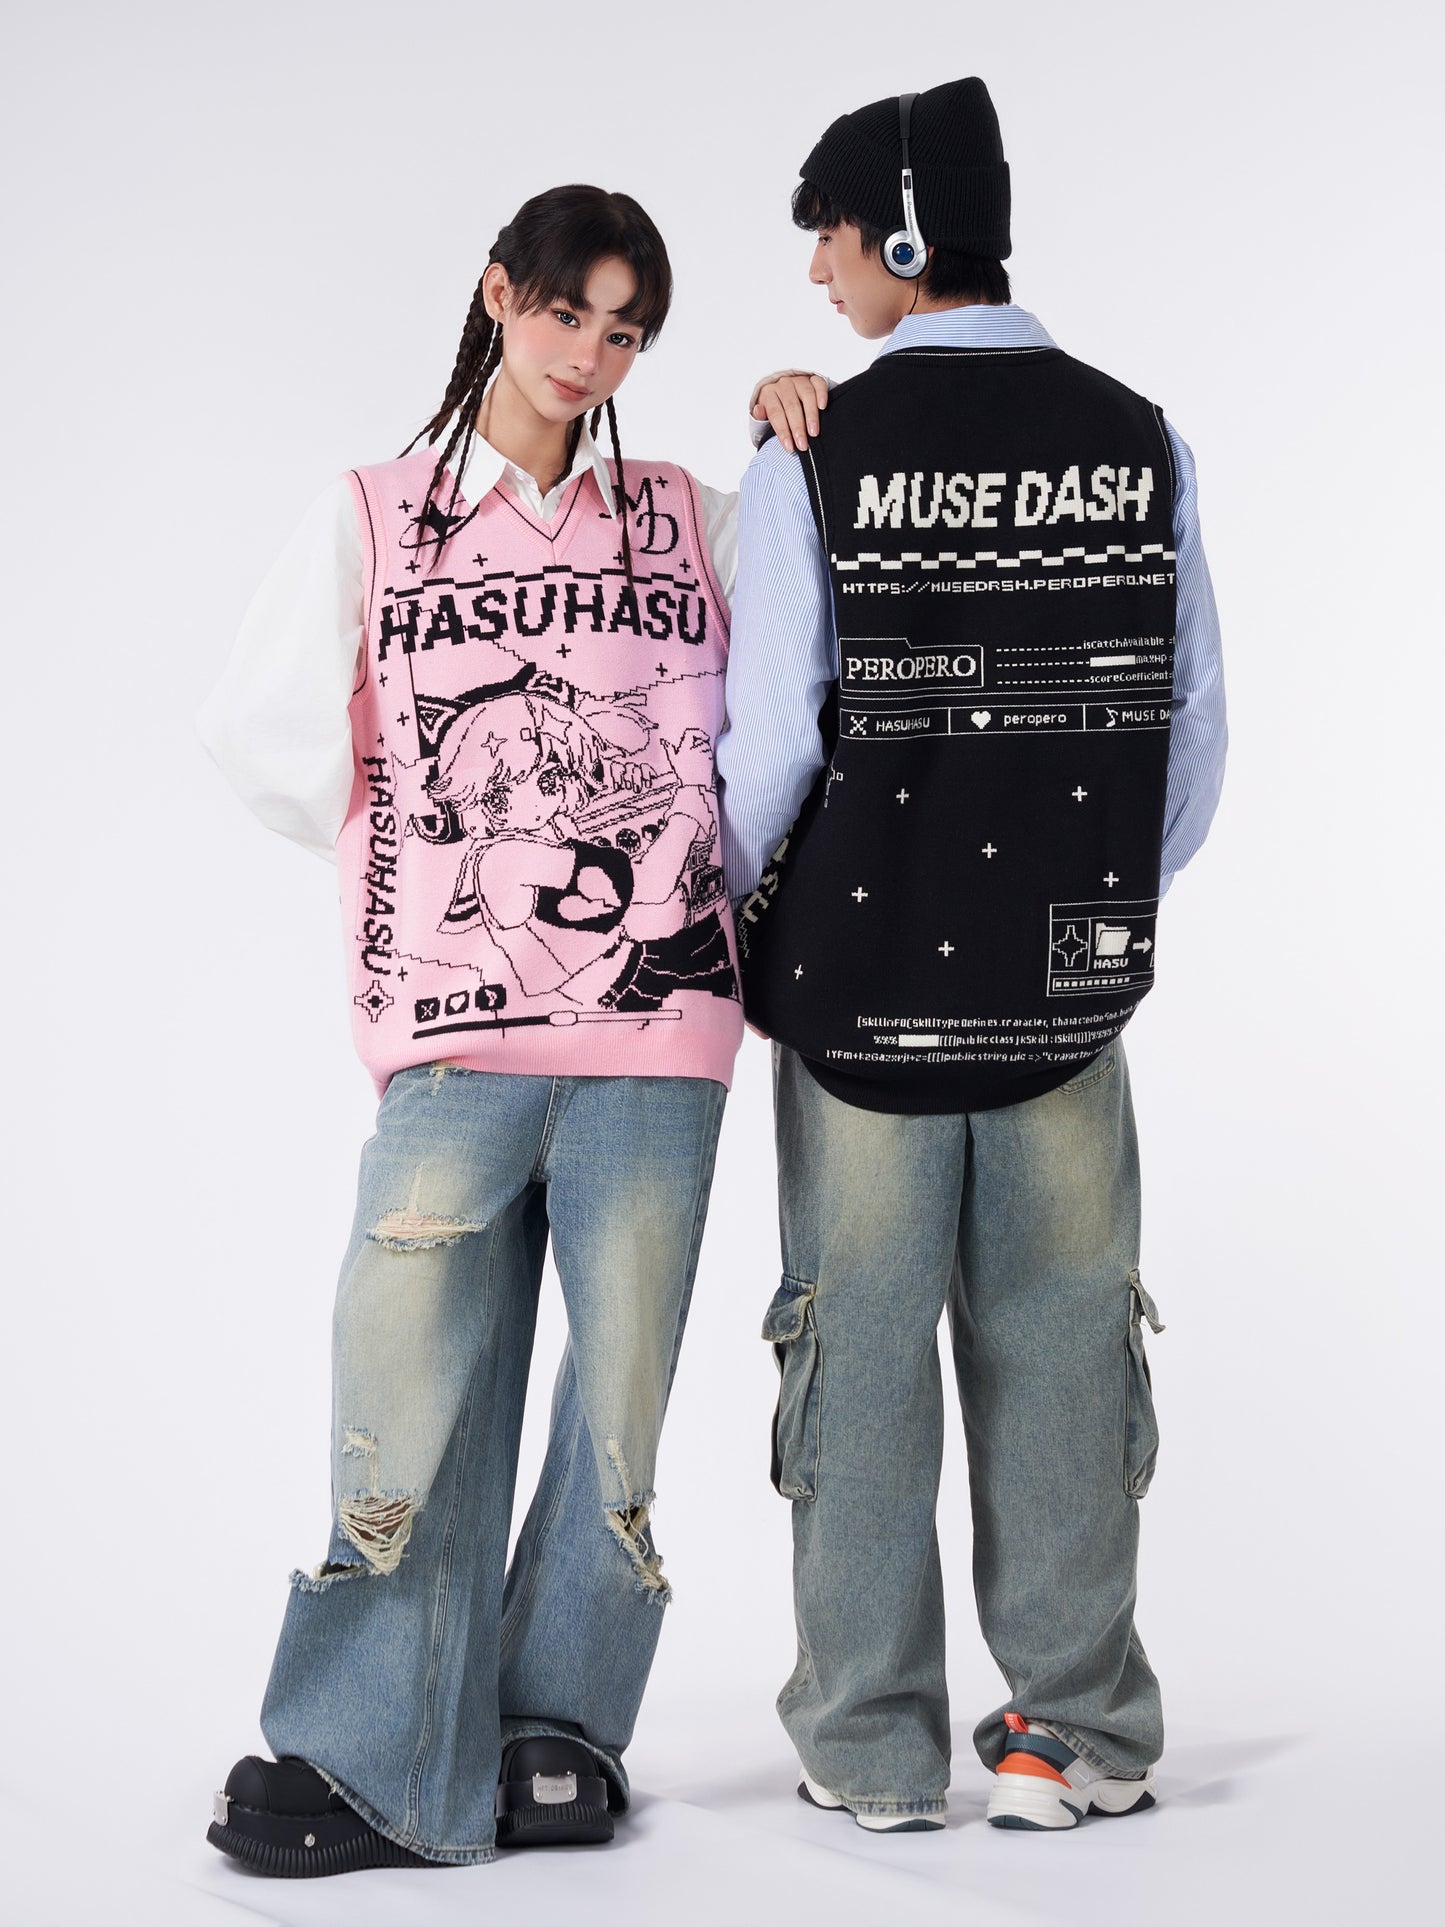 "Muse Dash" Winter Truancy Plan Knitted vest